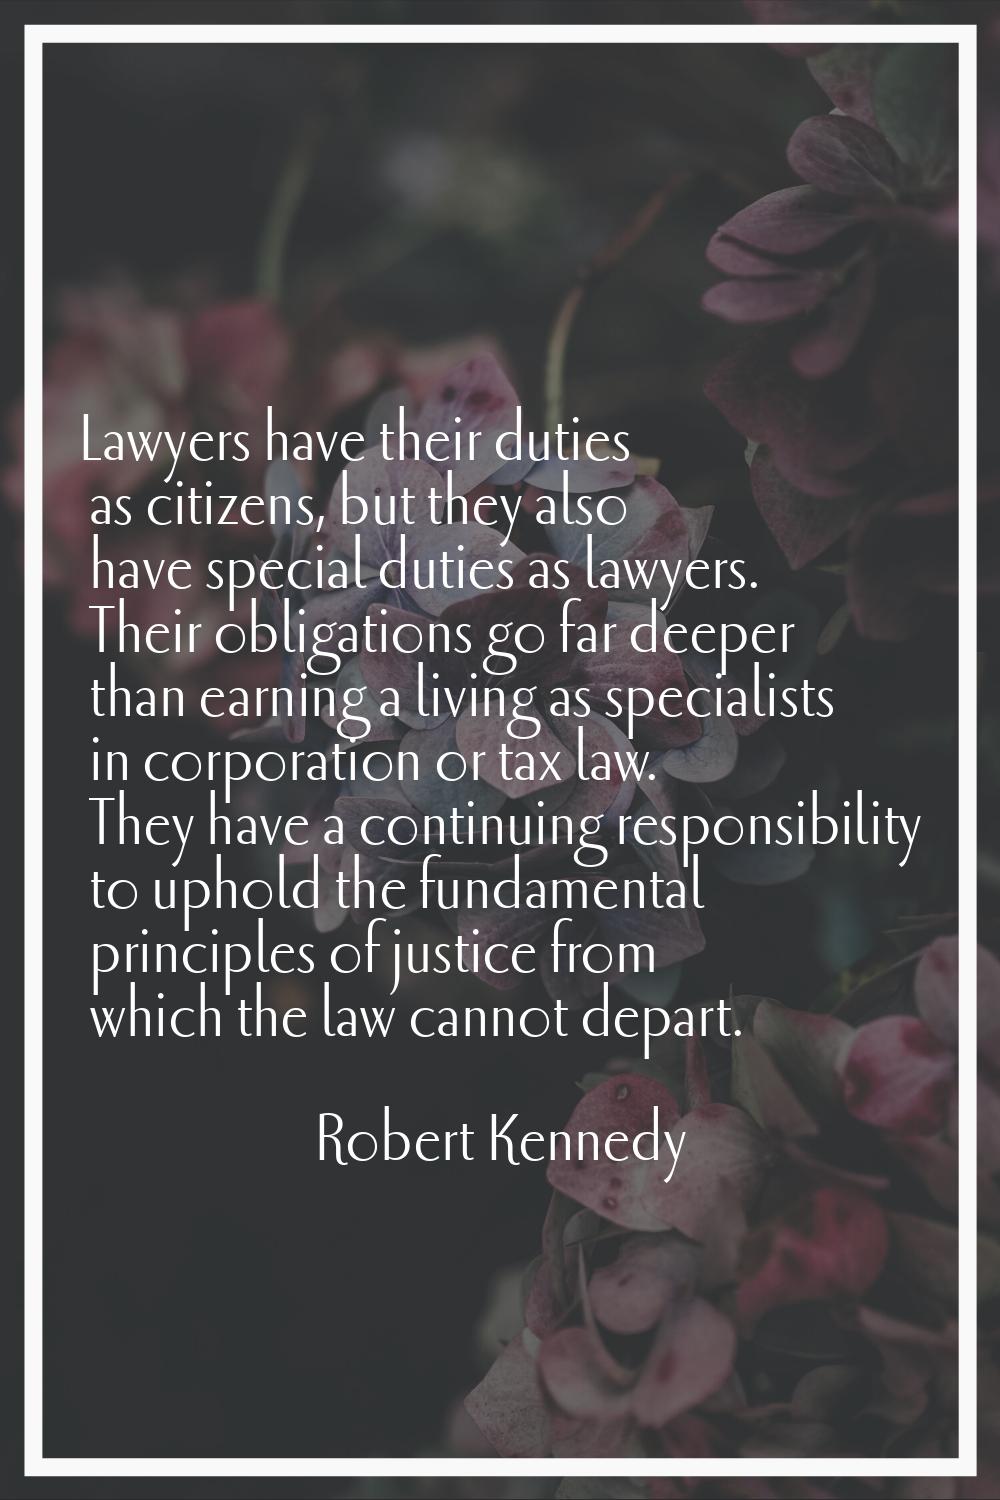 Lawyers have their duties as citizens, but they also have special duties as lawyers. Their obligati